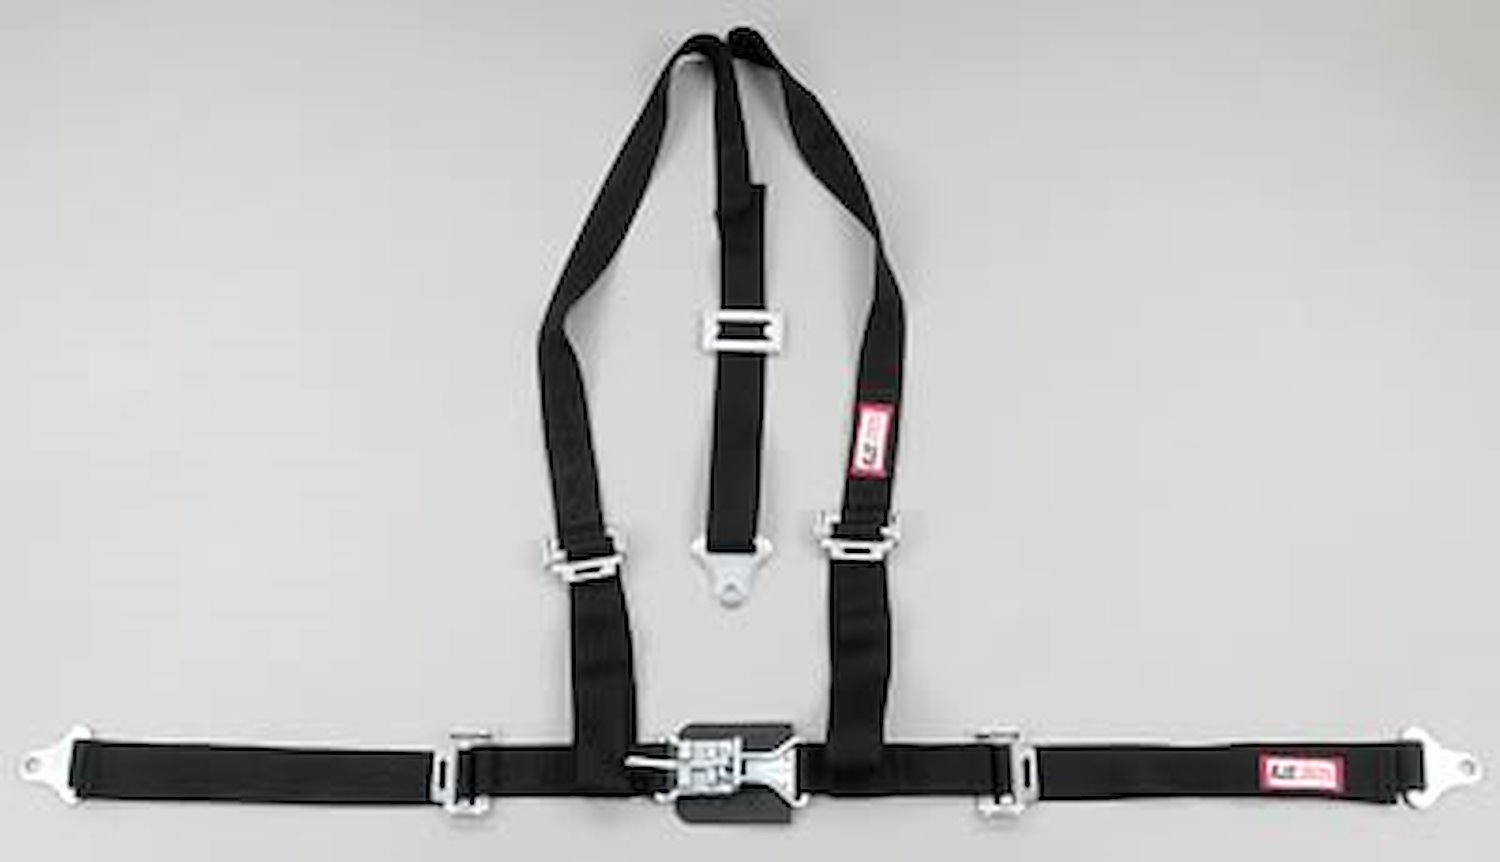 NON-SFI L&L HARNESS 2 PULL DOWN Lap Belt SNAP SEWN IN 2 S.H. INDIVIDUAL FLOOR Mount w/STERNUM STRAP WRAP/BOLT BLUE